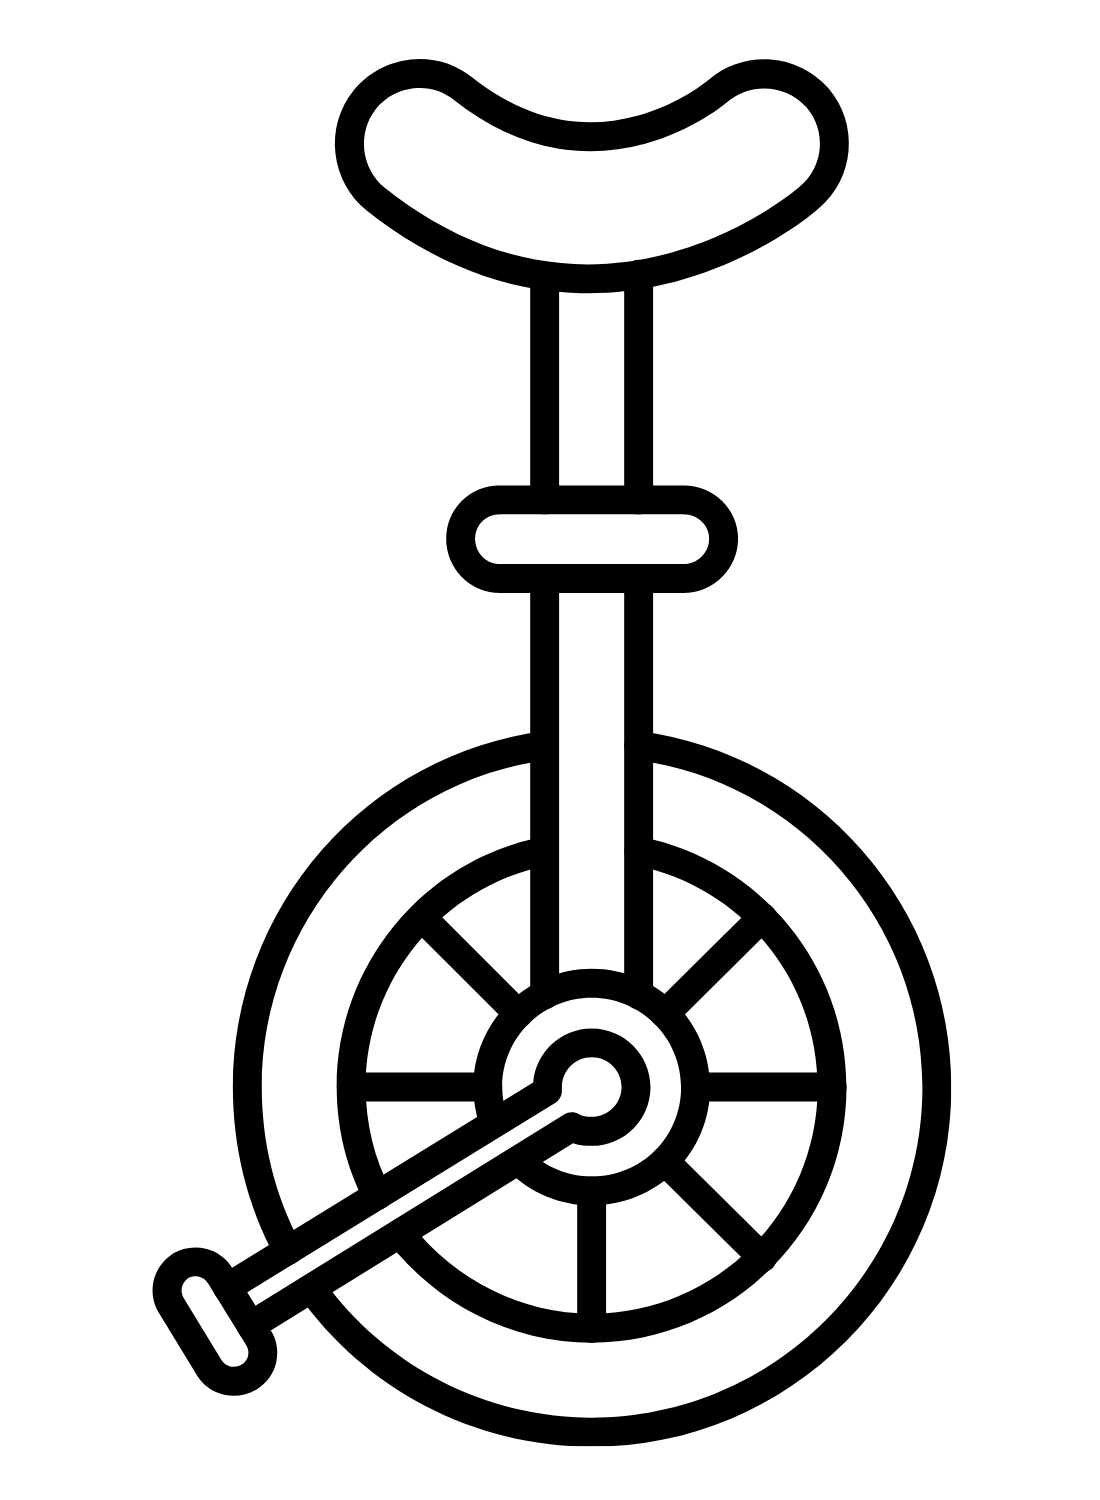 Unicycle coloring pages printable for free download